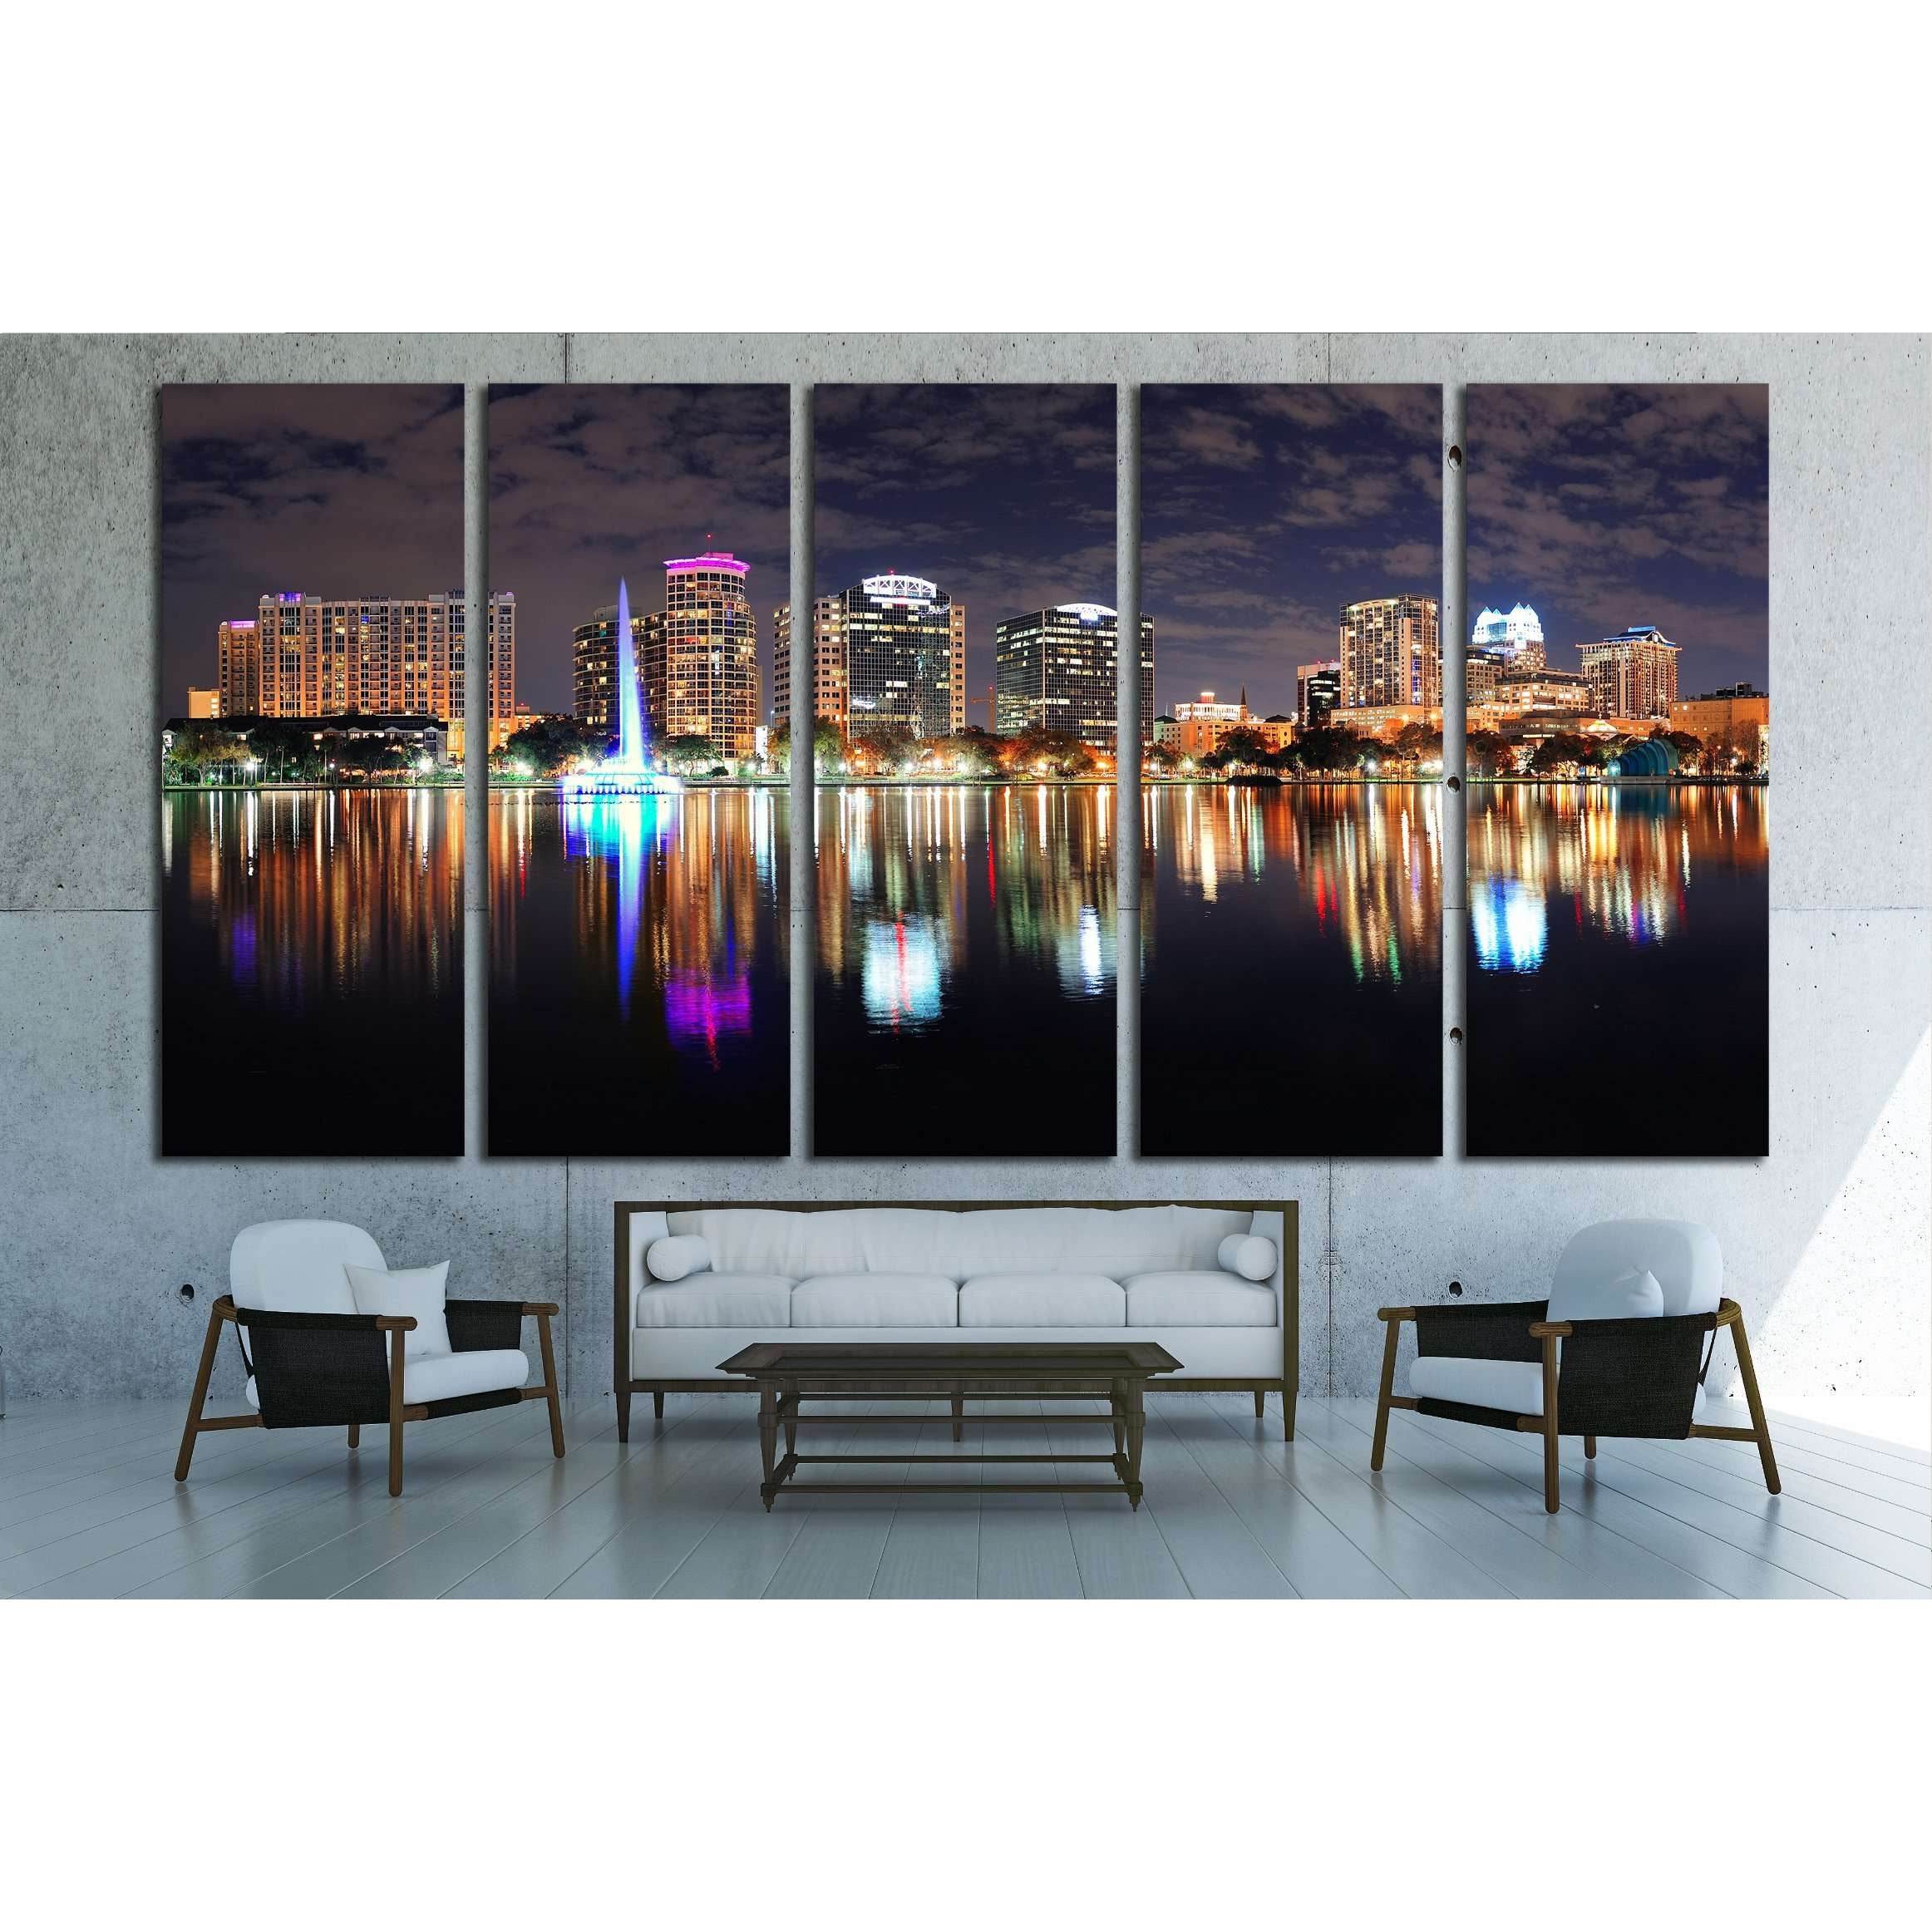 Orlando Eola panorama with office buildings at night №1932 Ready - Zellart Canvas Prints